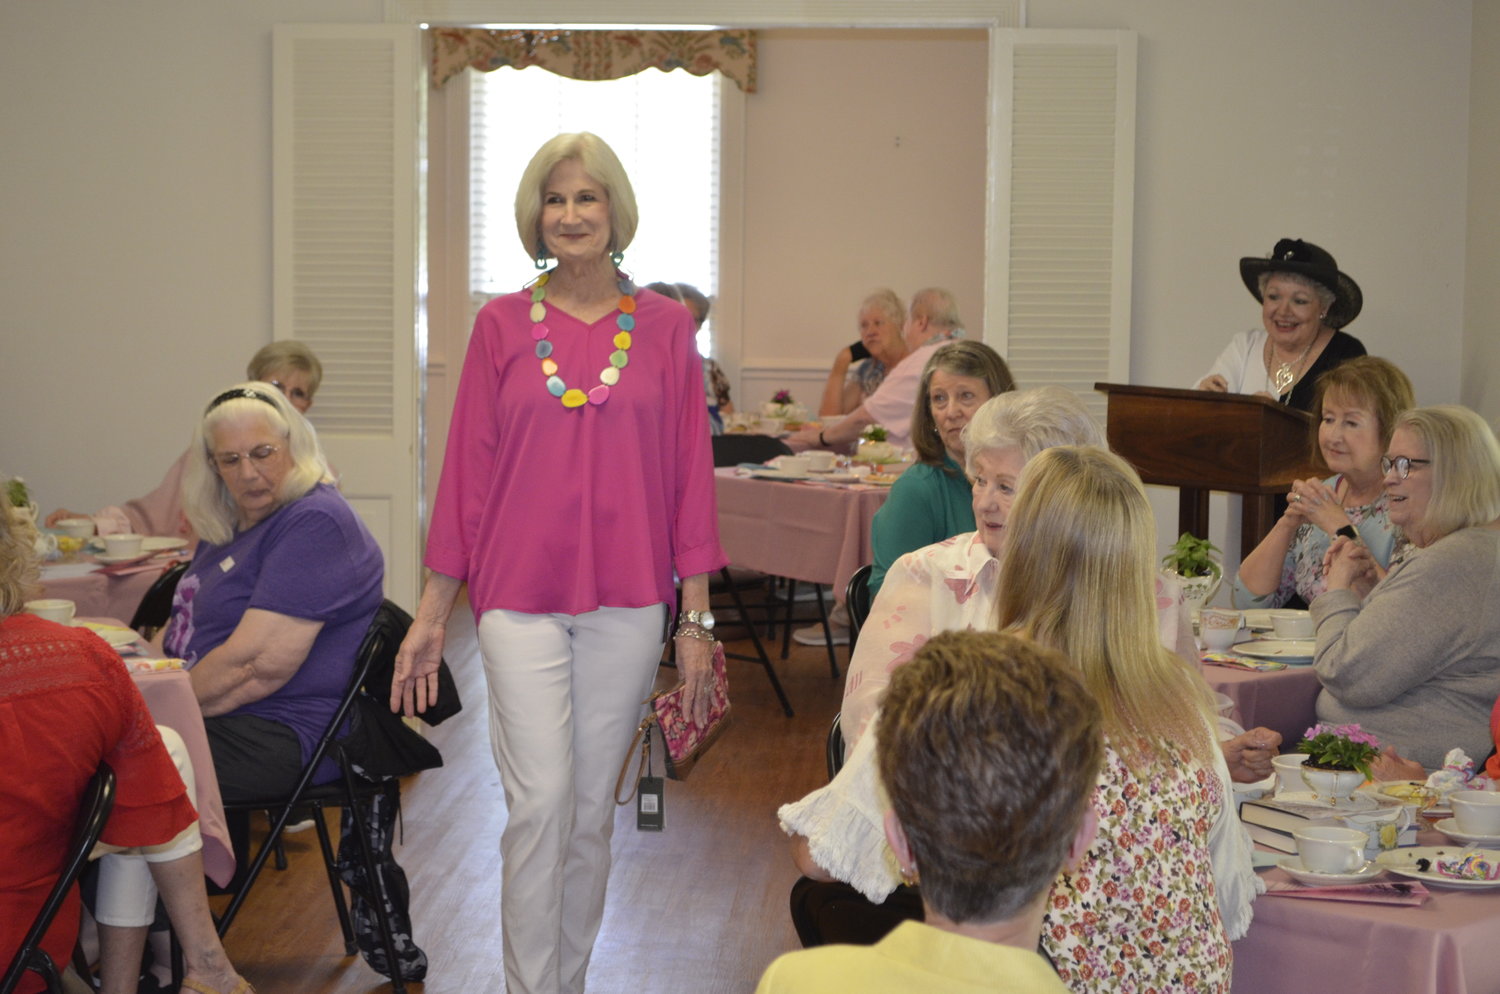 The Friends of the Mineola Memorial Library hosted a benefit tea last Thursday that included a fashion show by the Ladybug Jungle.